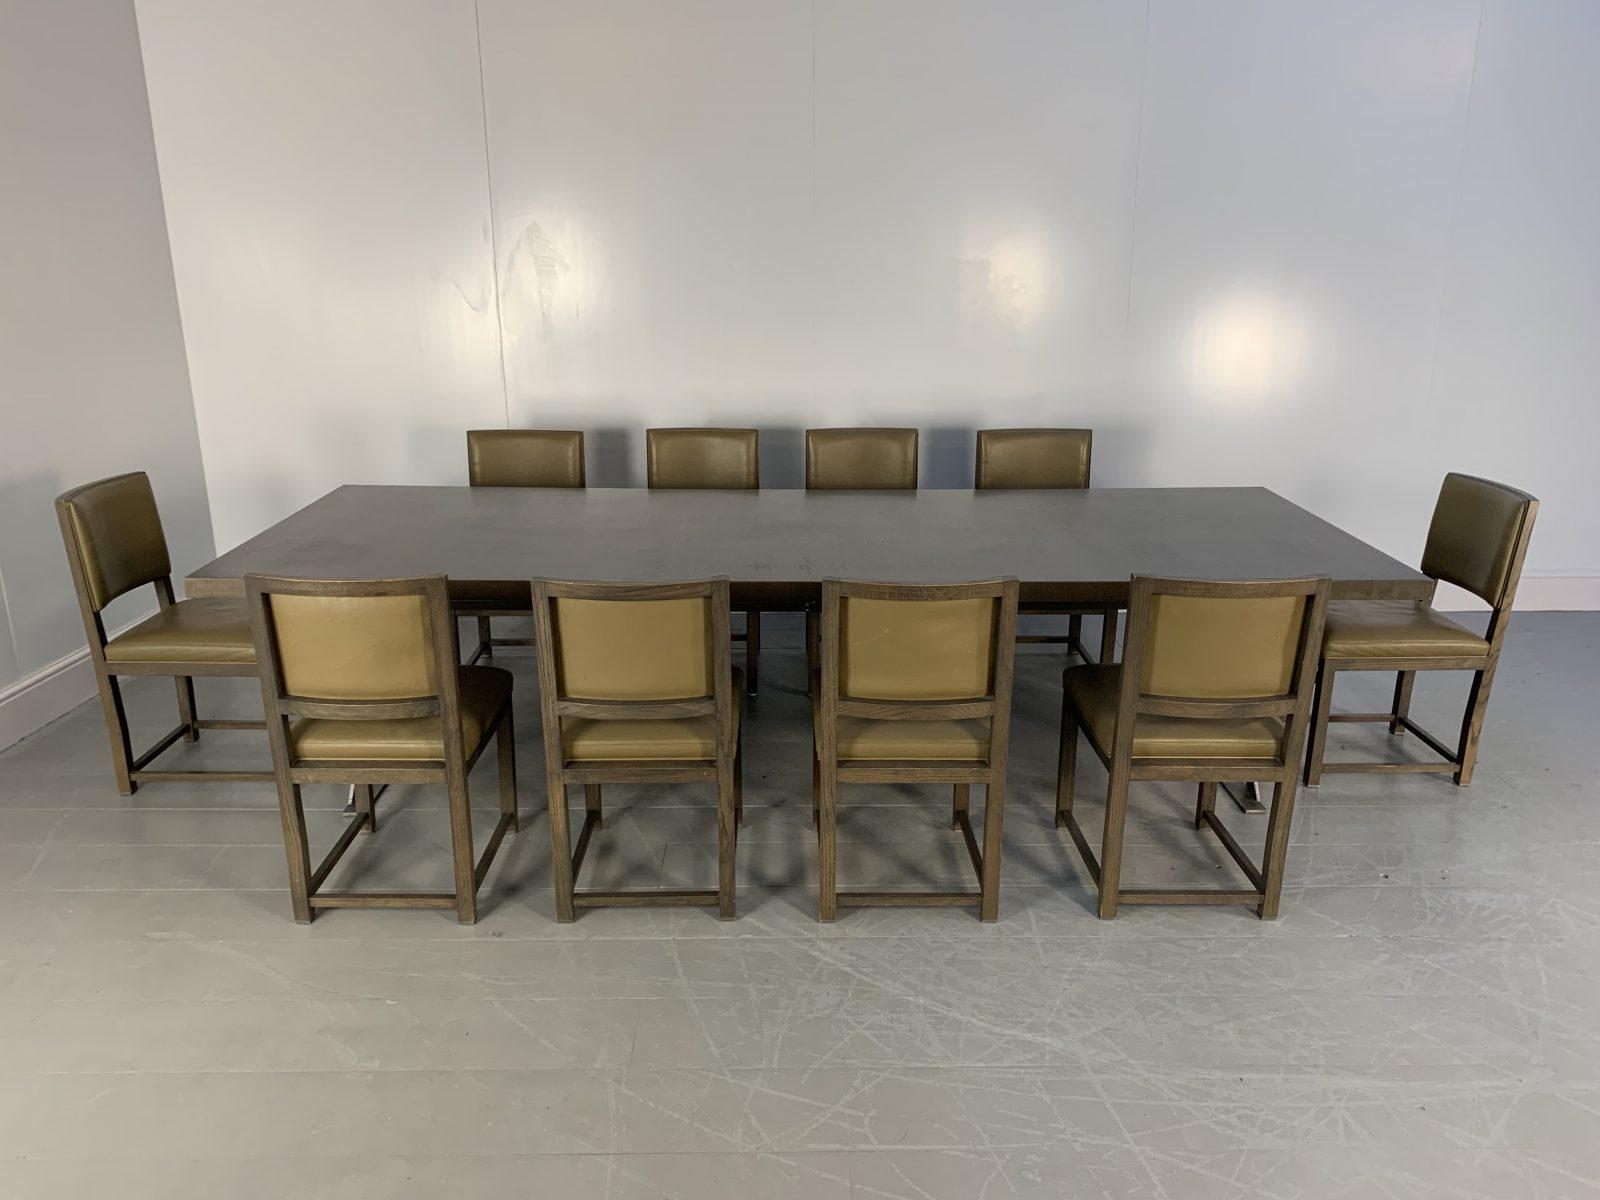 Hello Friends, and welcome to another unmissable offering from Lord Browns Furniture, the UK’s premier resource for fine Sofas and Chairs.

On offer on this occasion is a sublime, immaculately-presented “Max SMTR30” Dining Table in Grey Oak with a